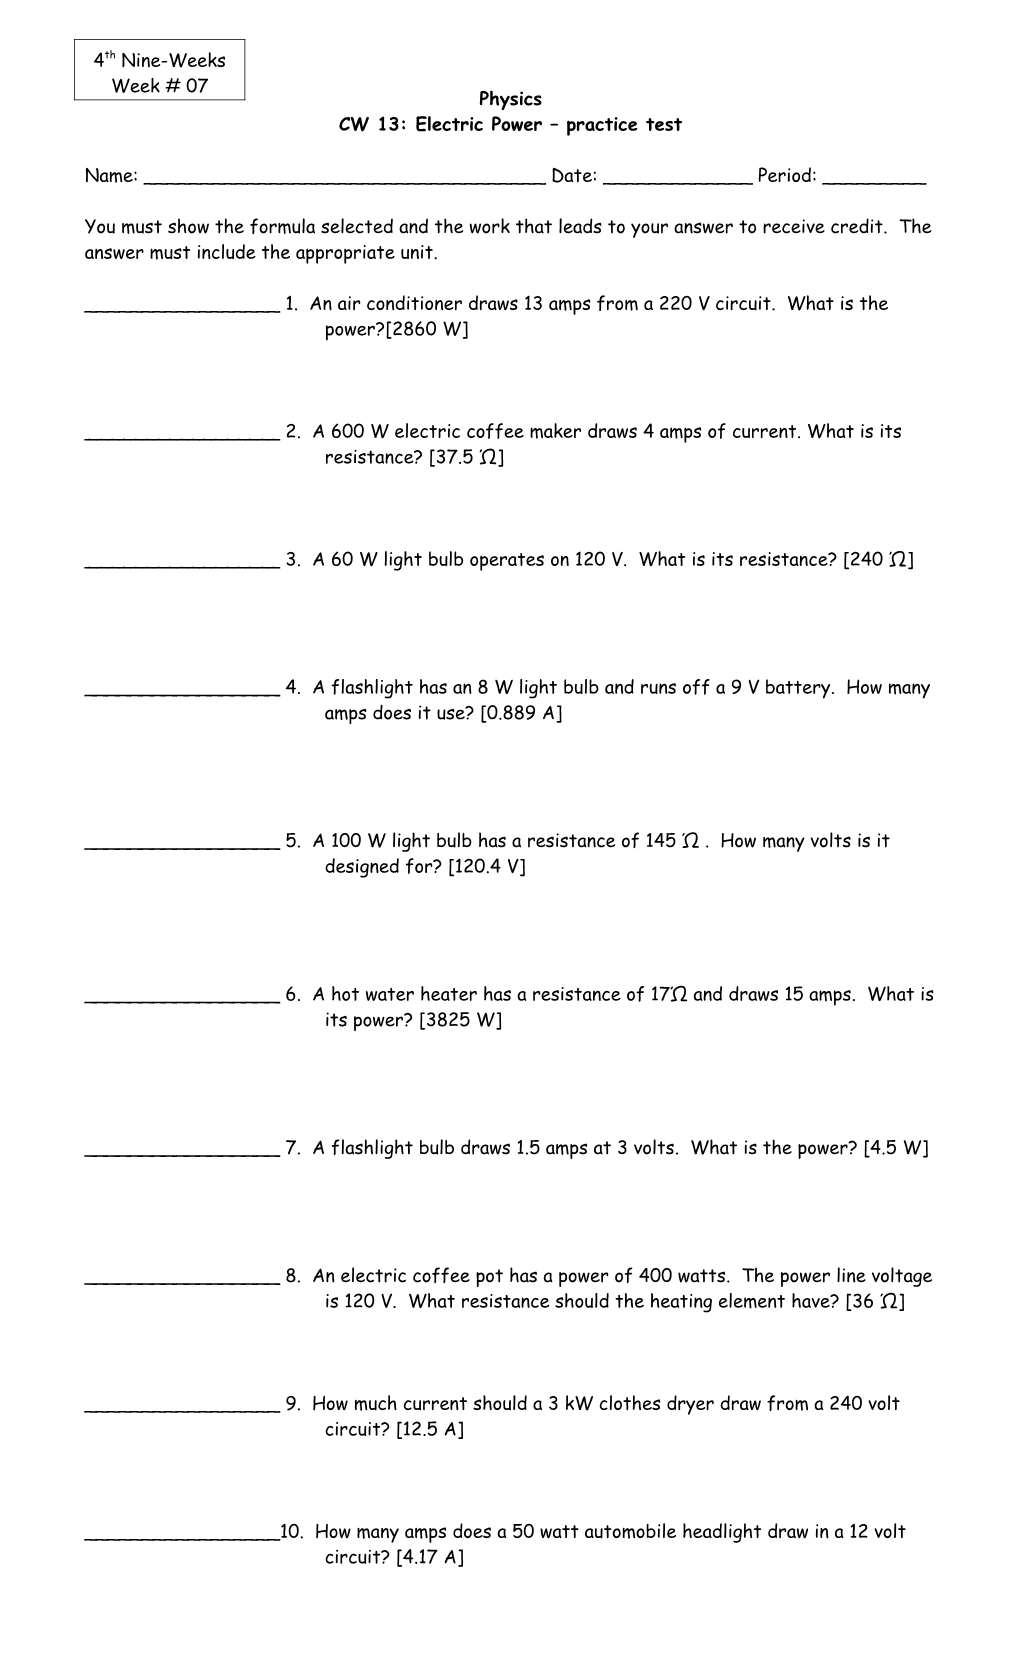 CW 13: Electric Power Practice Test